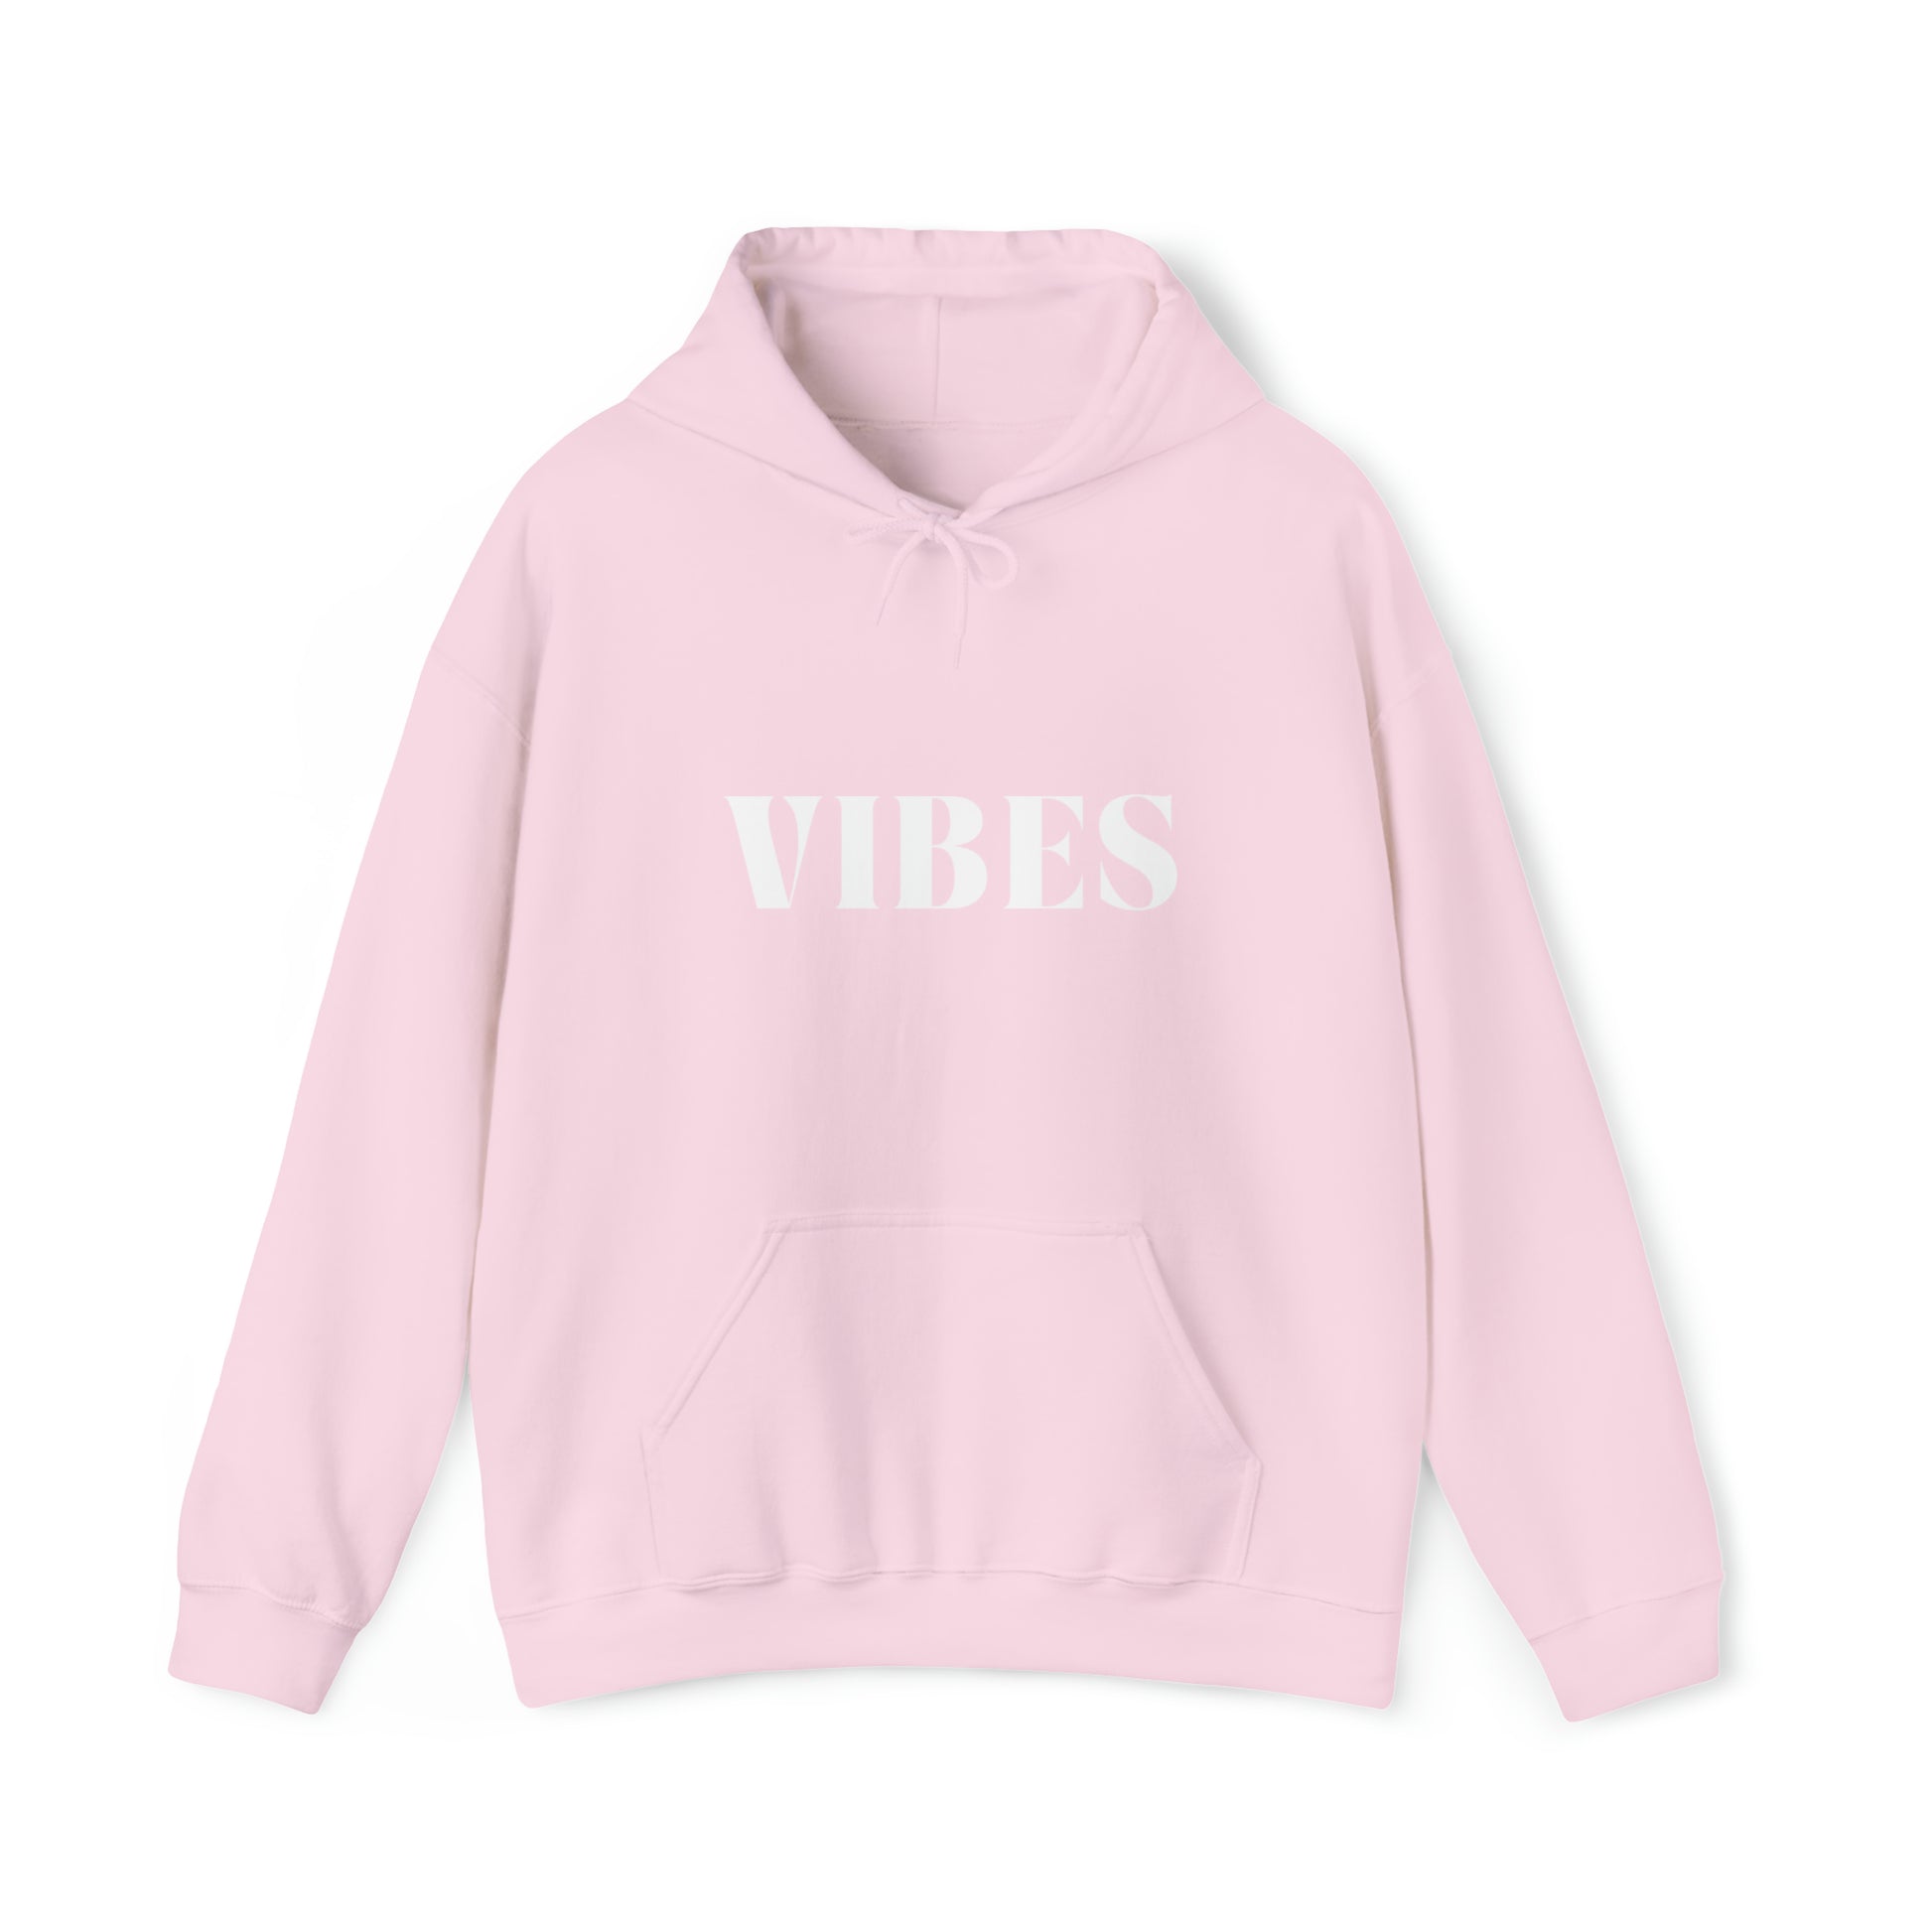 S Light Pink Vibes Hoodie from HoodySZN.com